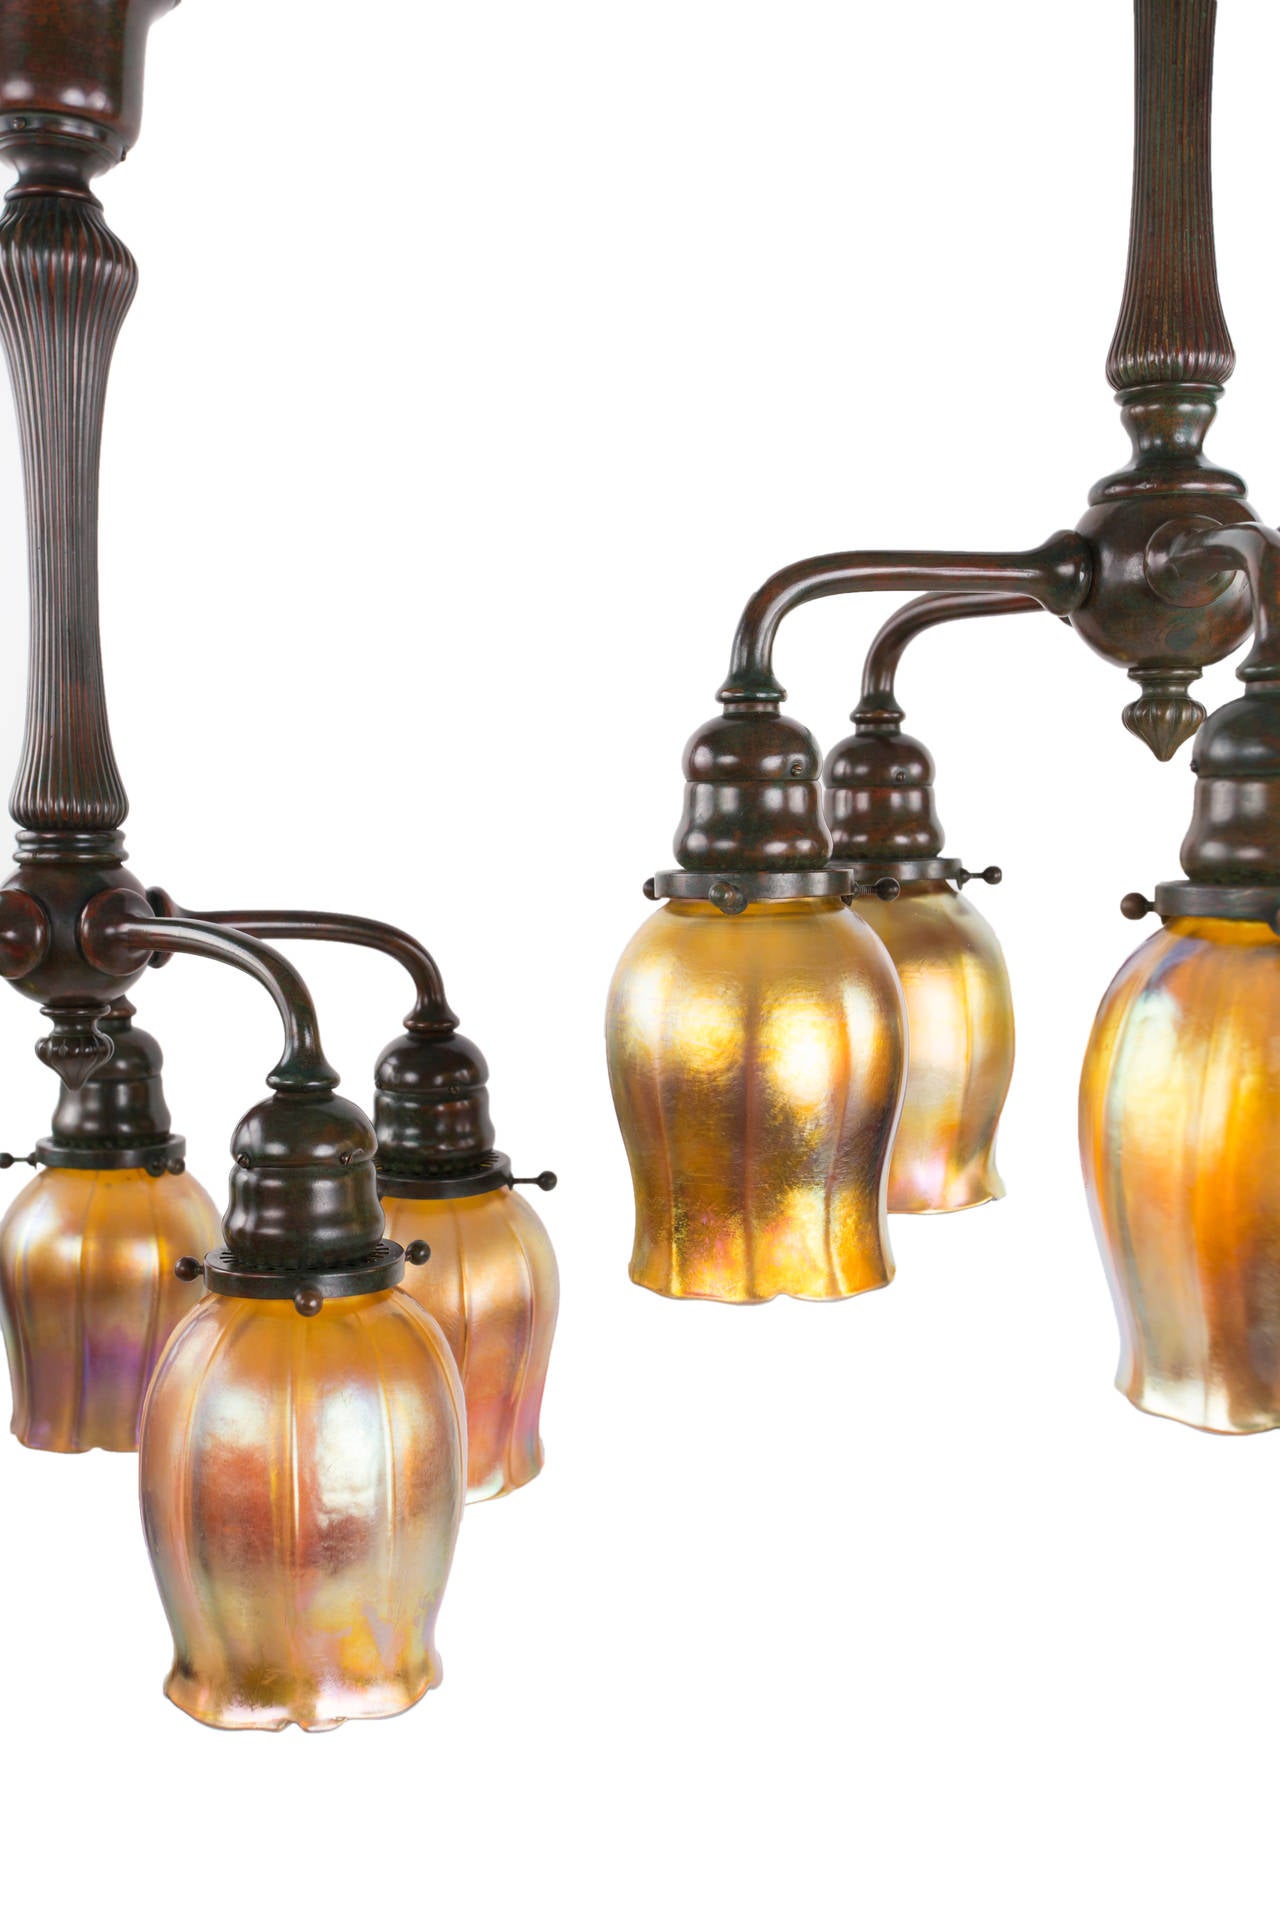 A fine and rare matching pair of patinated bronze and glass chandeliers by, Tiffany Studios each decorated five matching blown glass Tiffany Favrile 